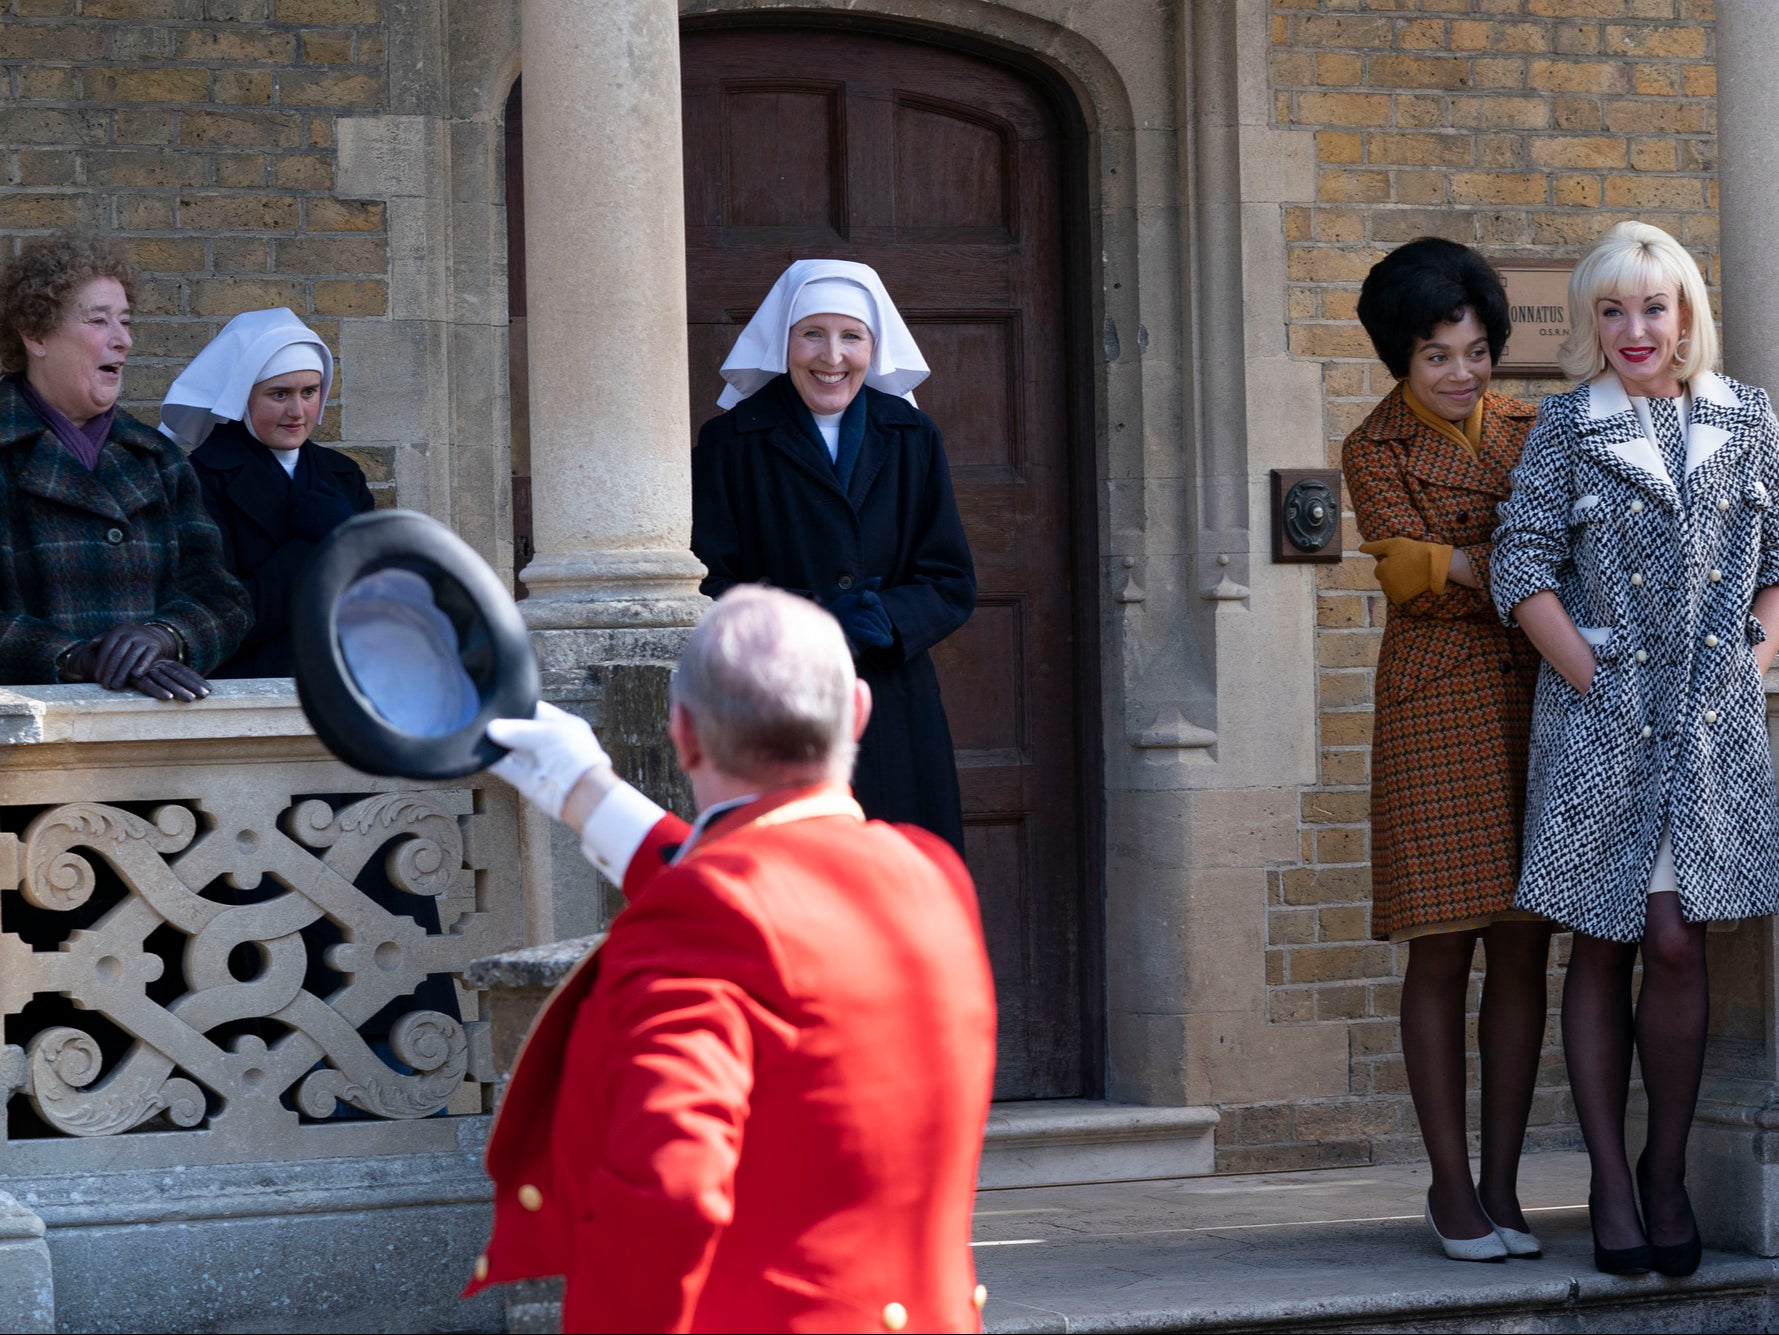 call the midwife christmas special rapidshare premium